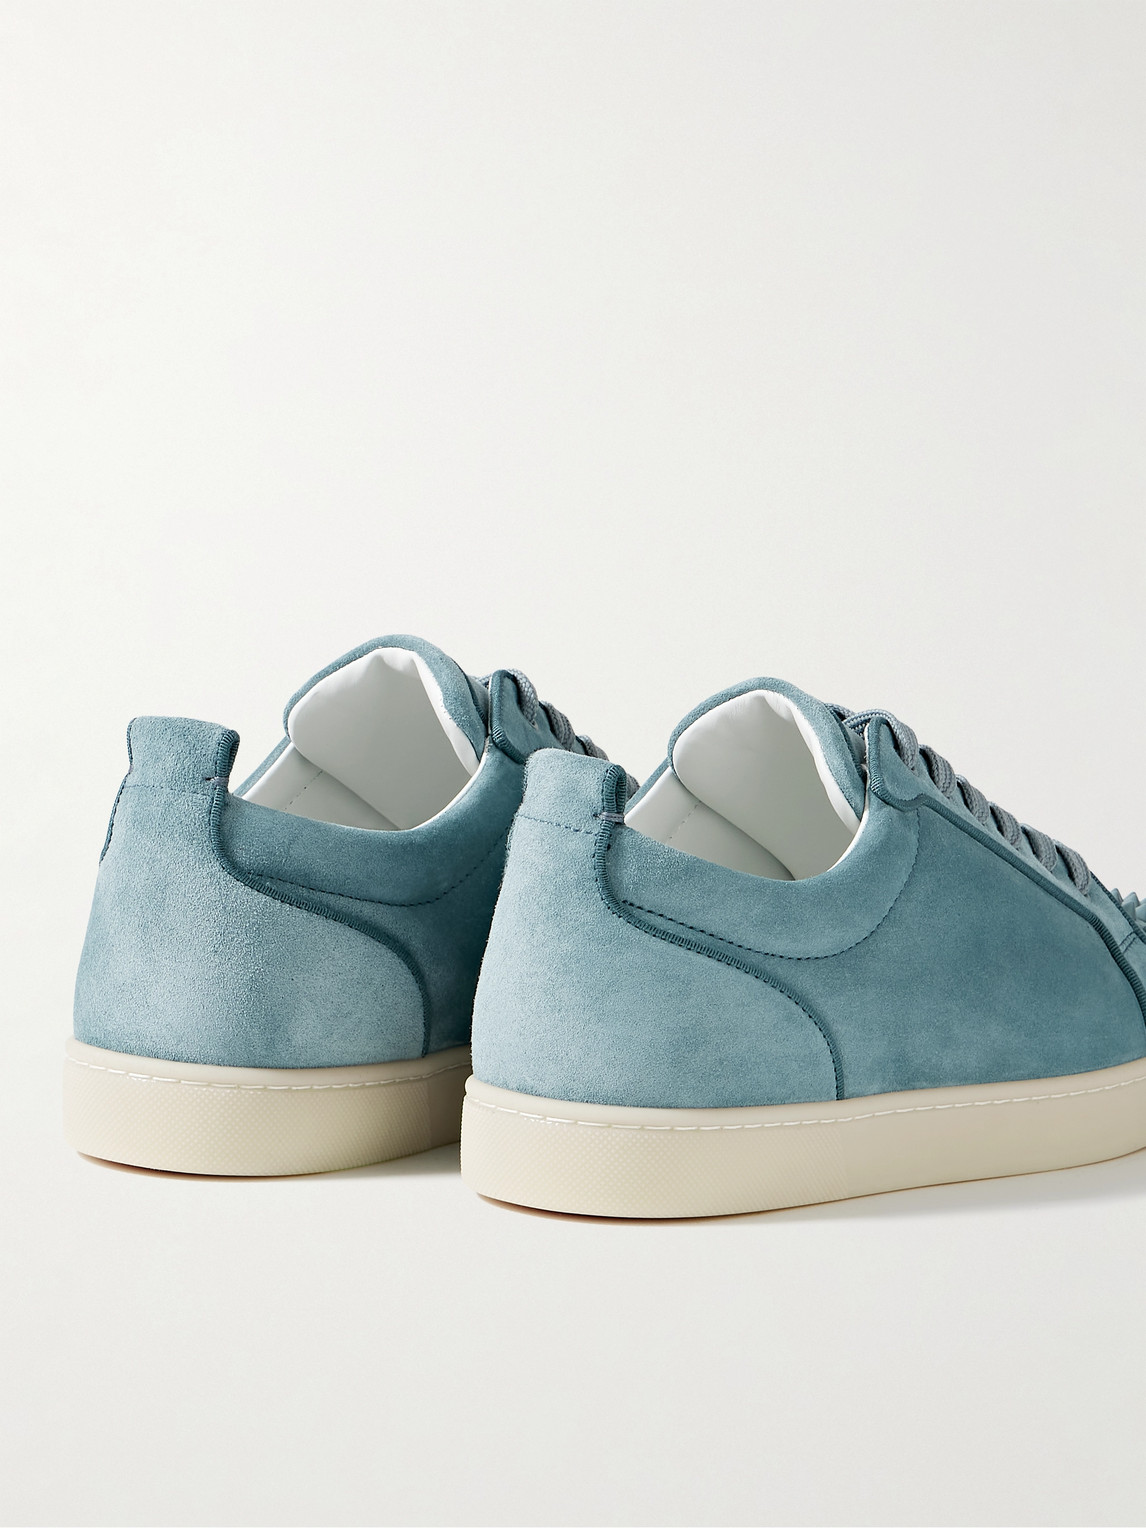 Shop Christian Louboutin Louis Junior Spiked Suede Sneakers In Blue